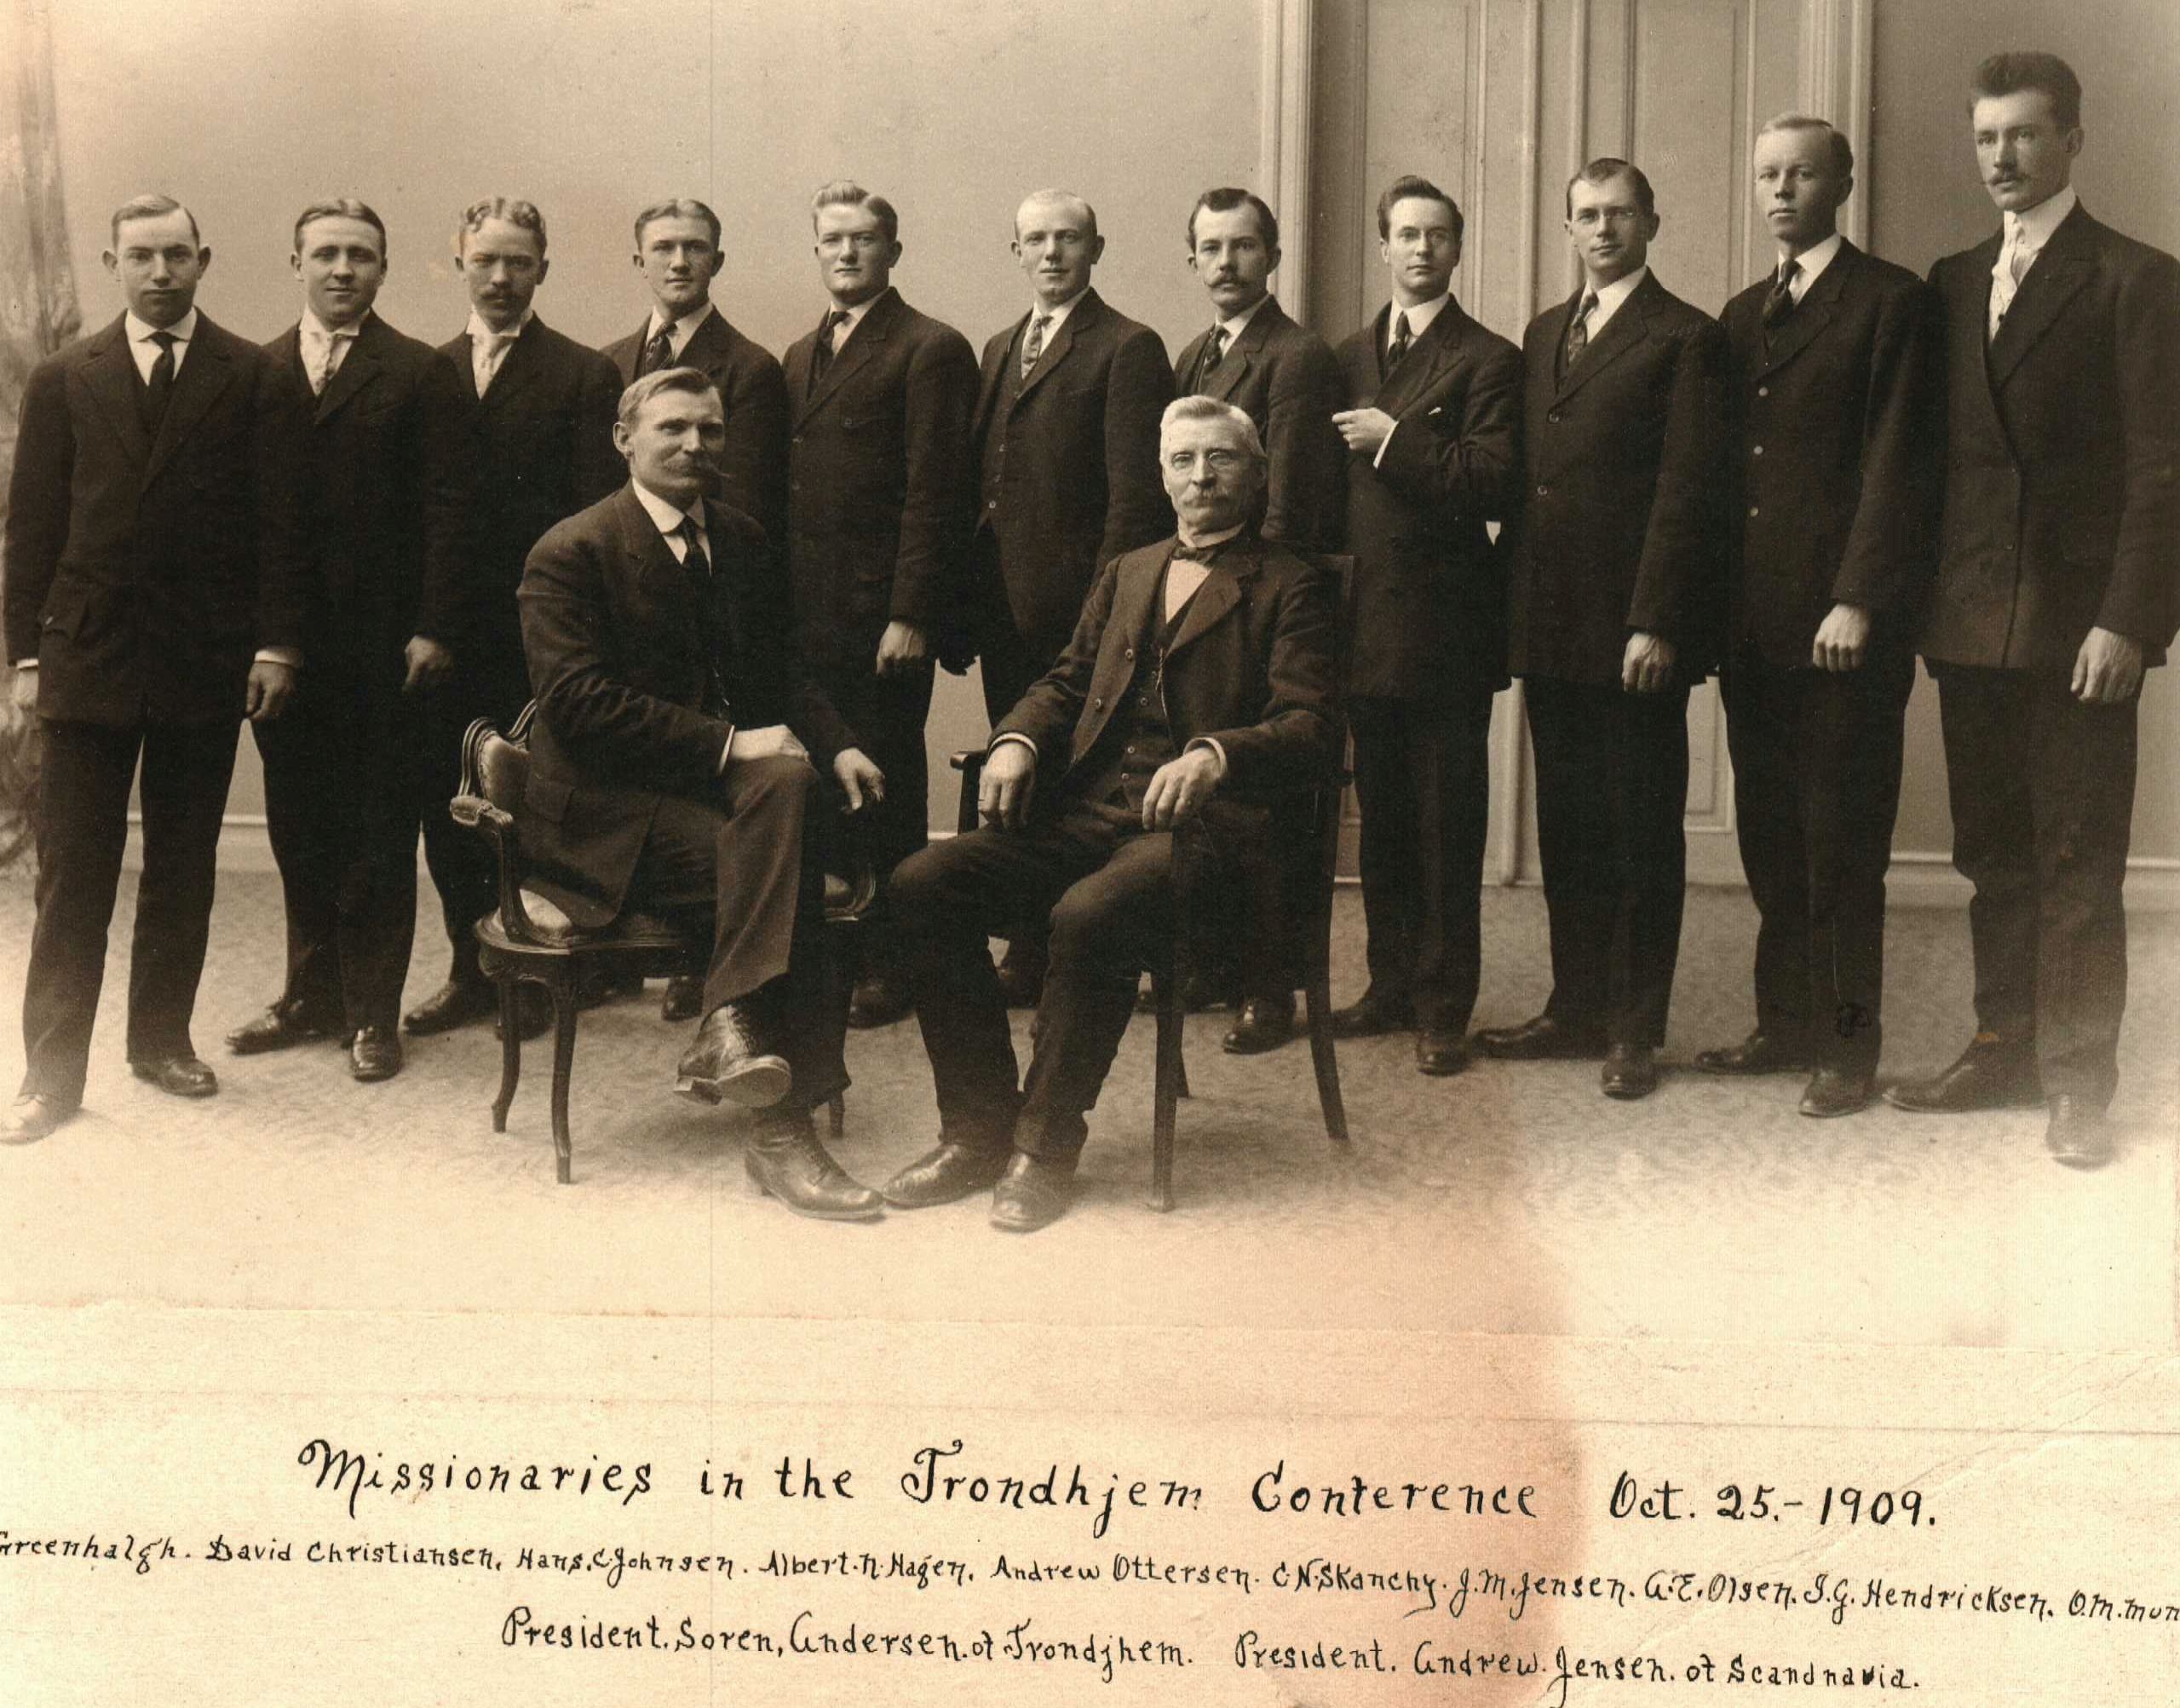 Missionaries in the Trondhjem Conference, Oct 25, 1909